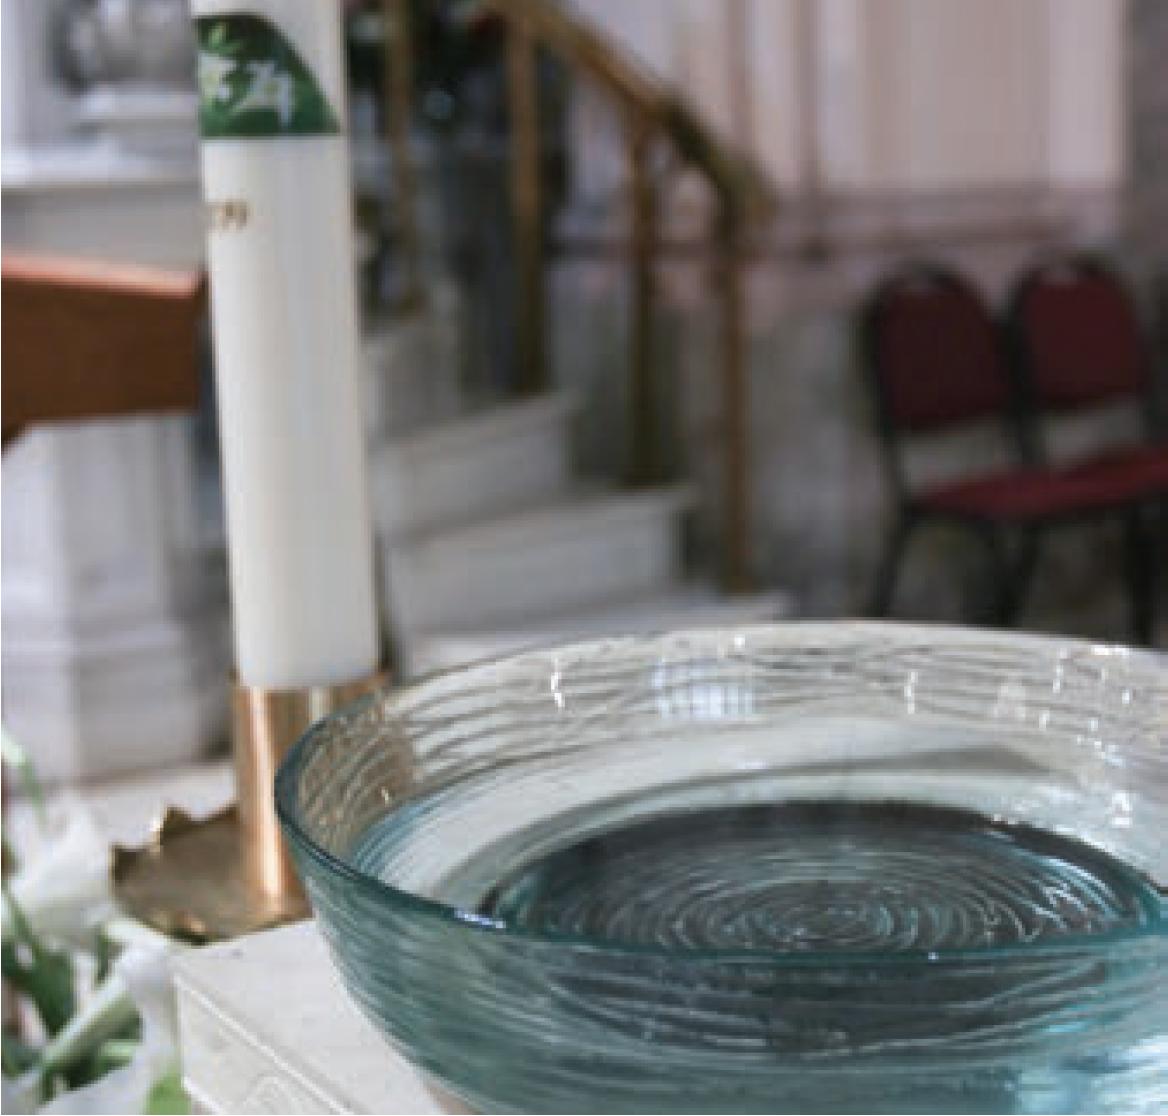 Baptismal font and Paschal candle. 